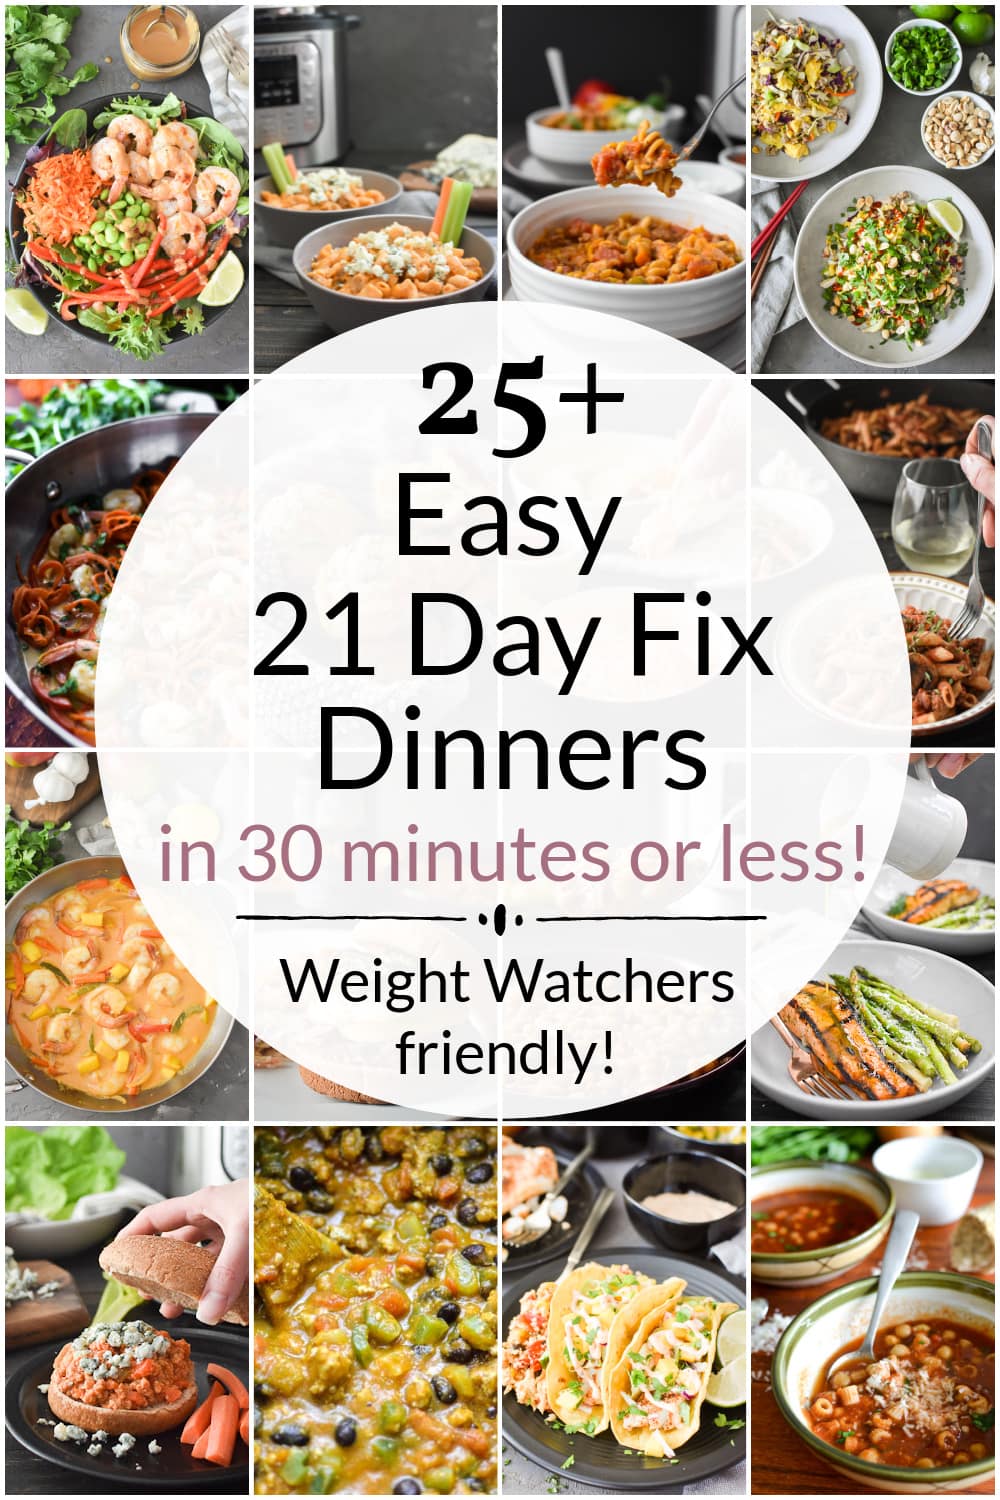 21 Day Fix Quick Dinners 30 Minutes Or